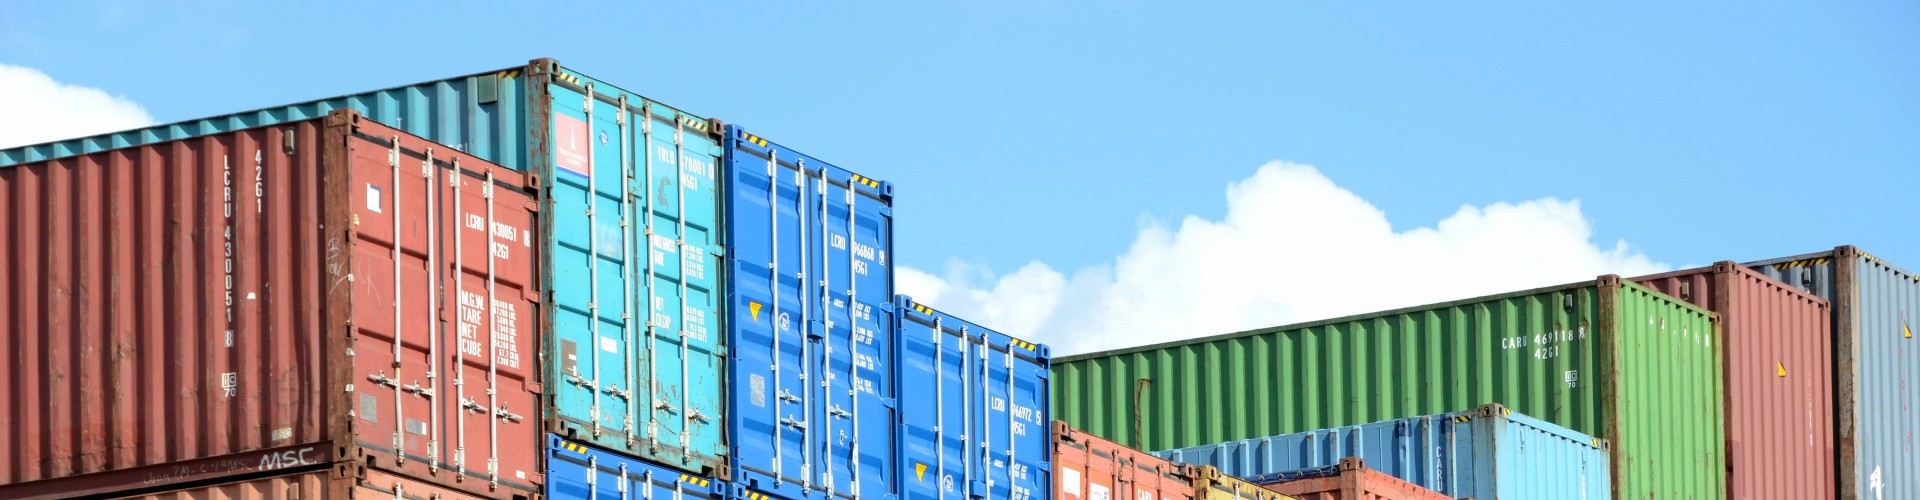 Shipping containers and blue sky